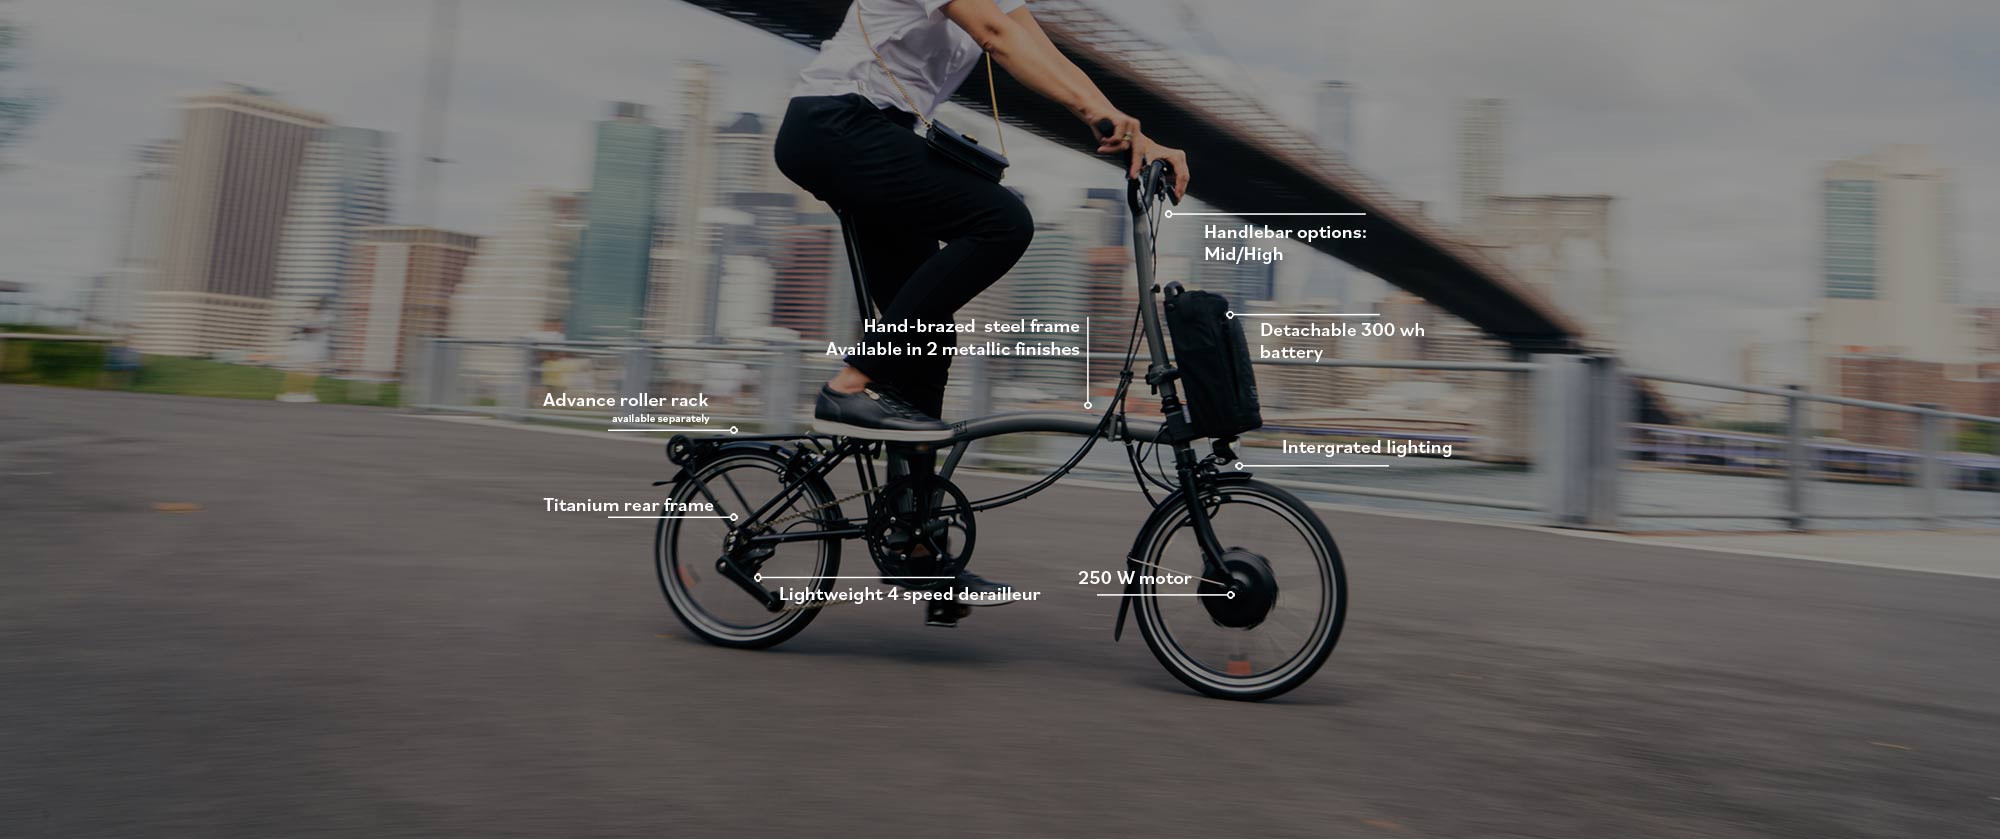 Bike image with text